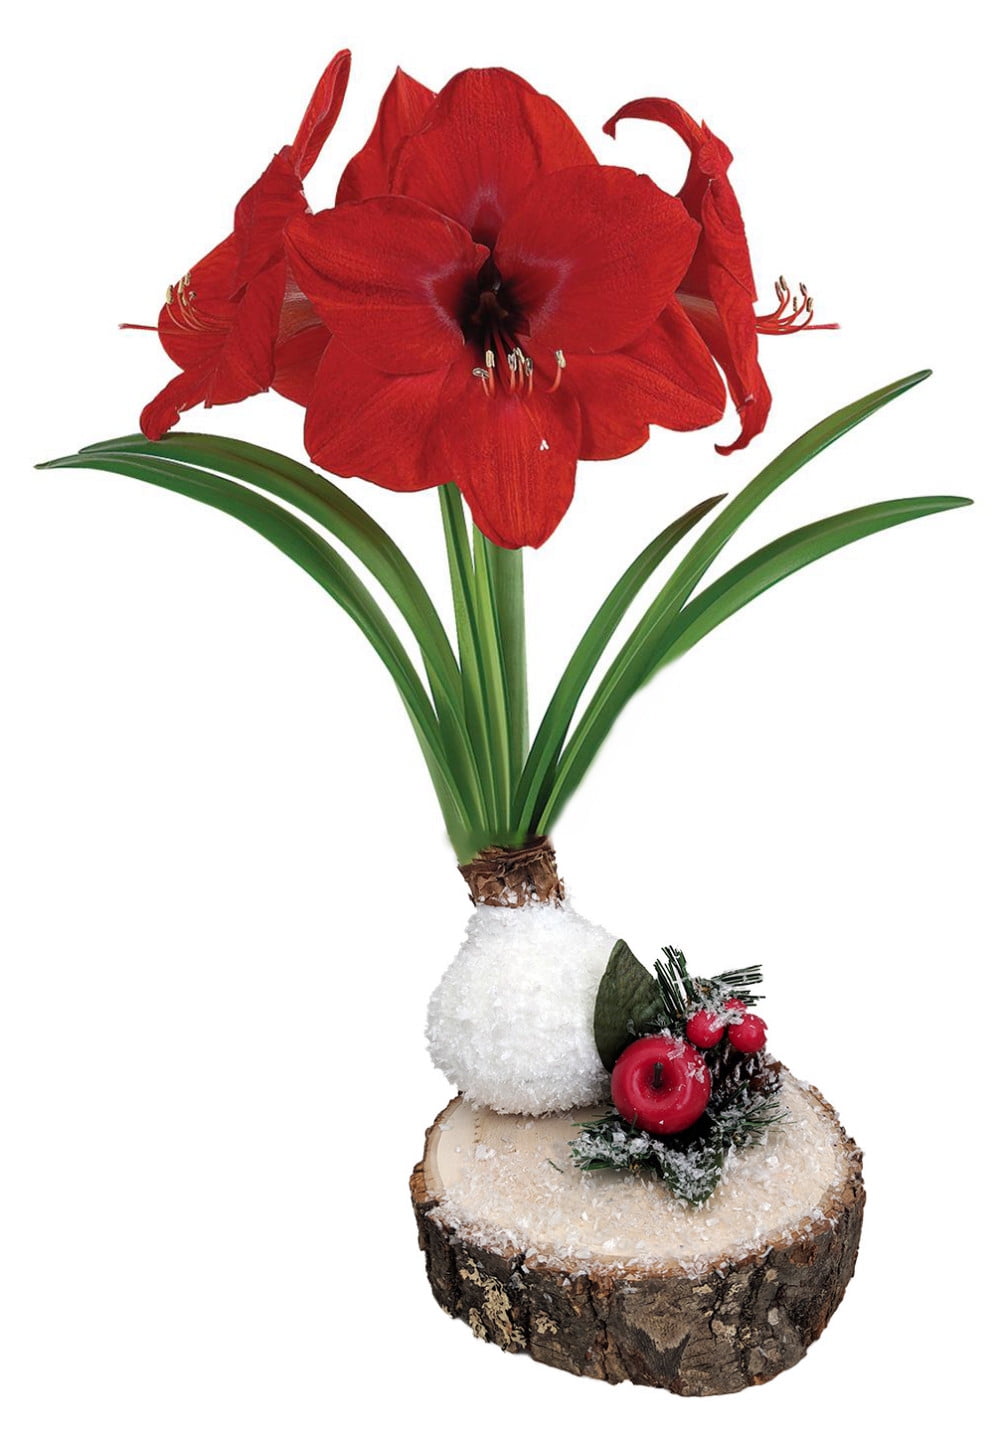 Details about   Amaryllis Bulb Standing Snowman Glitter Dipped Waxed Blooms Without Soil/Water 